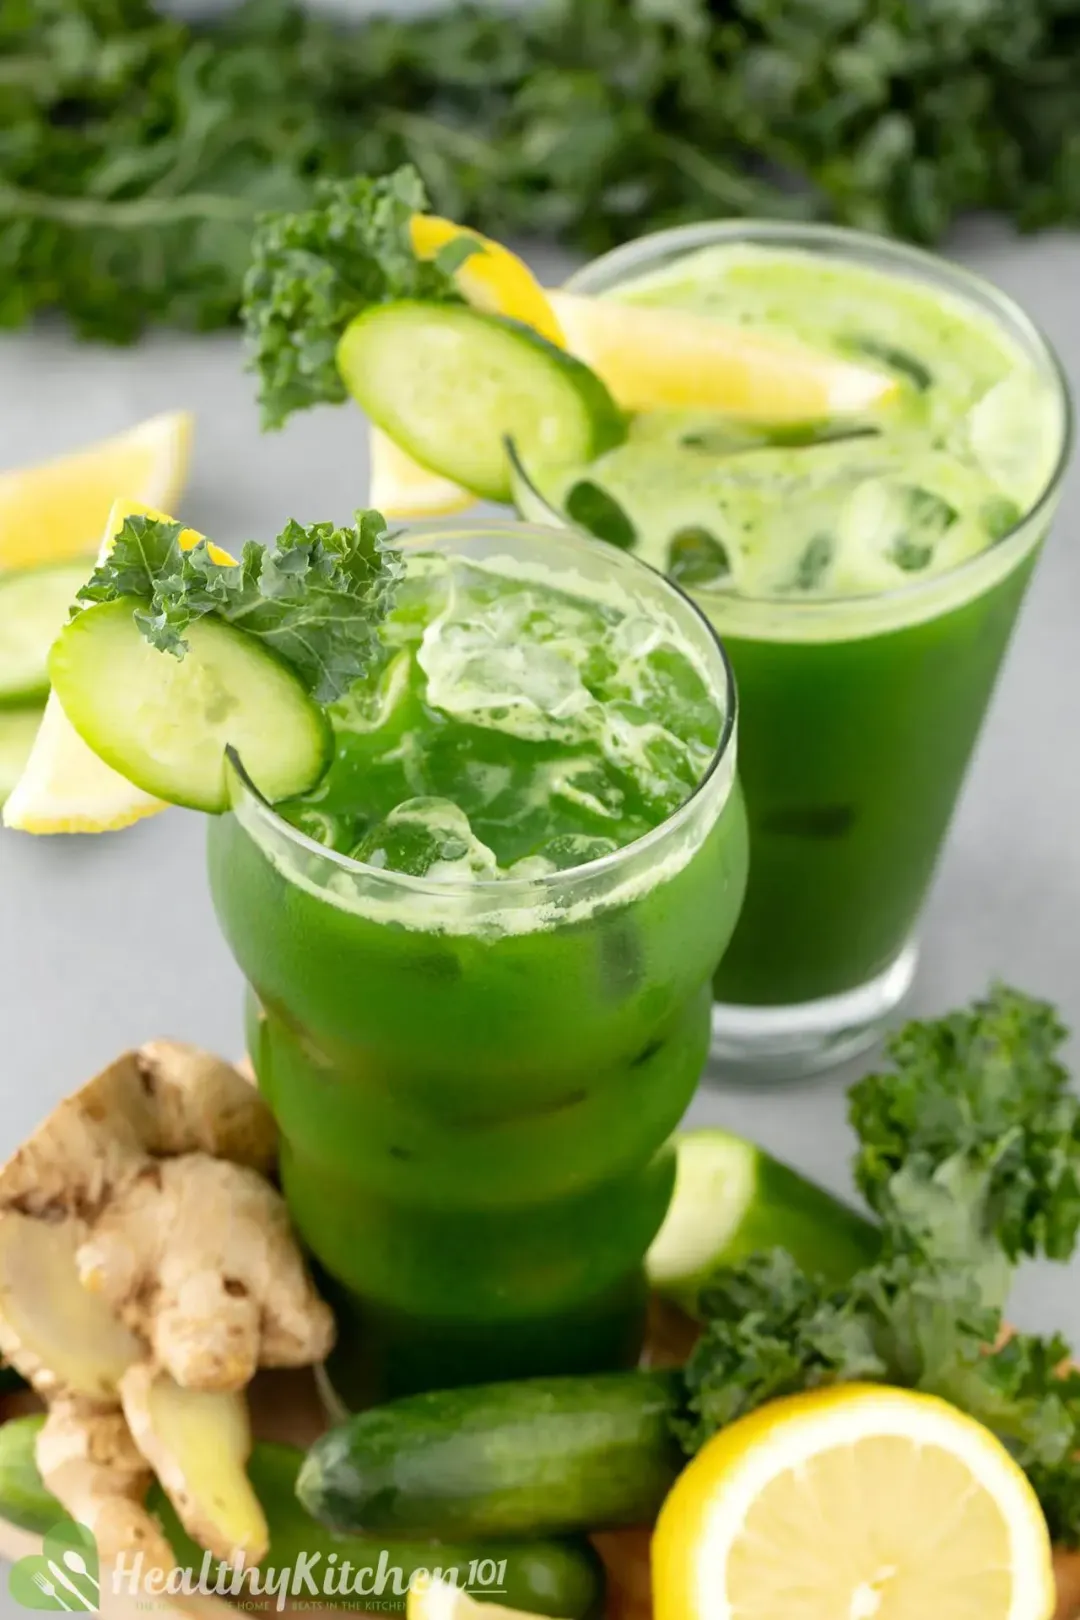 Two iced glasses of green kale juice next to some kale and a tray of cucumber, ginger, and lemon